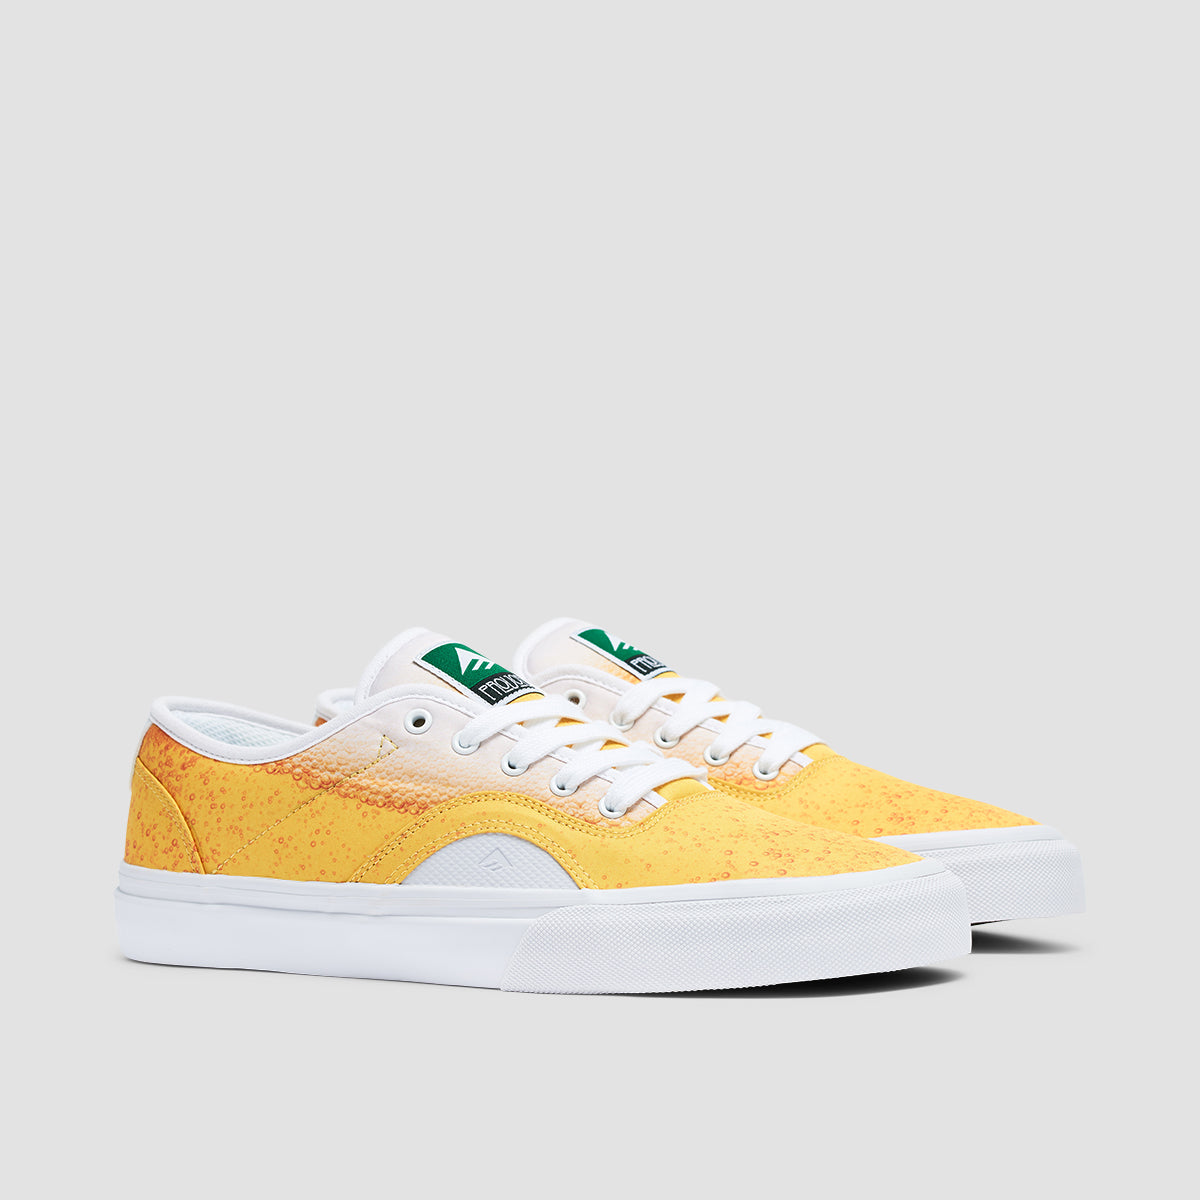 Emerica Provost G6 Shoes Gold